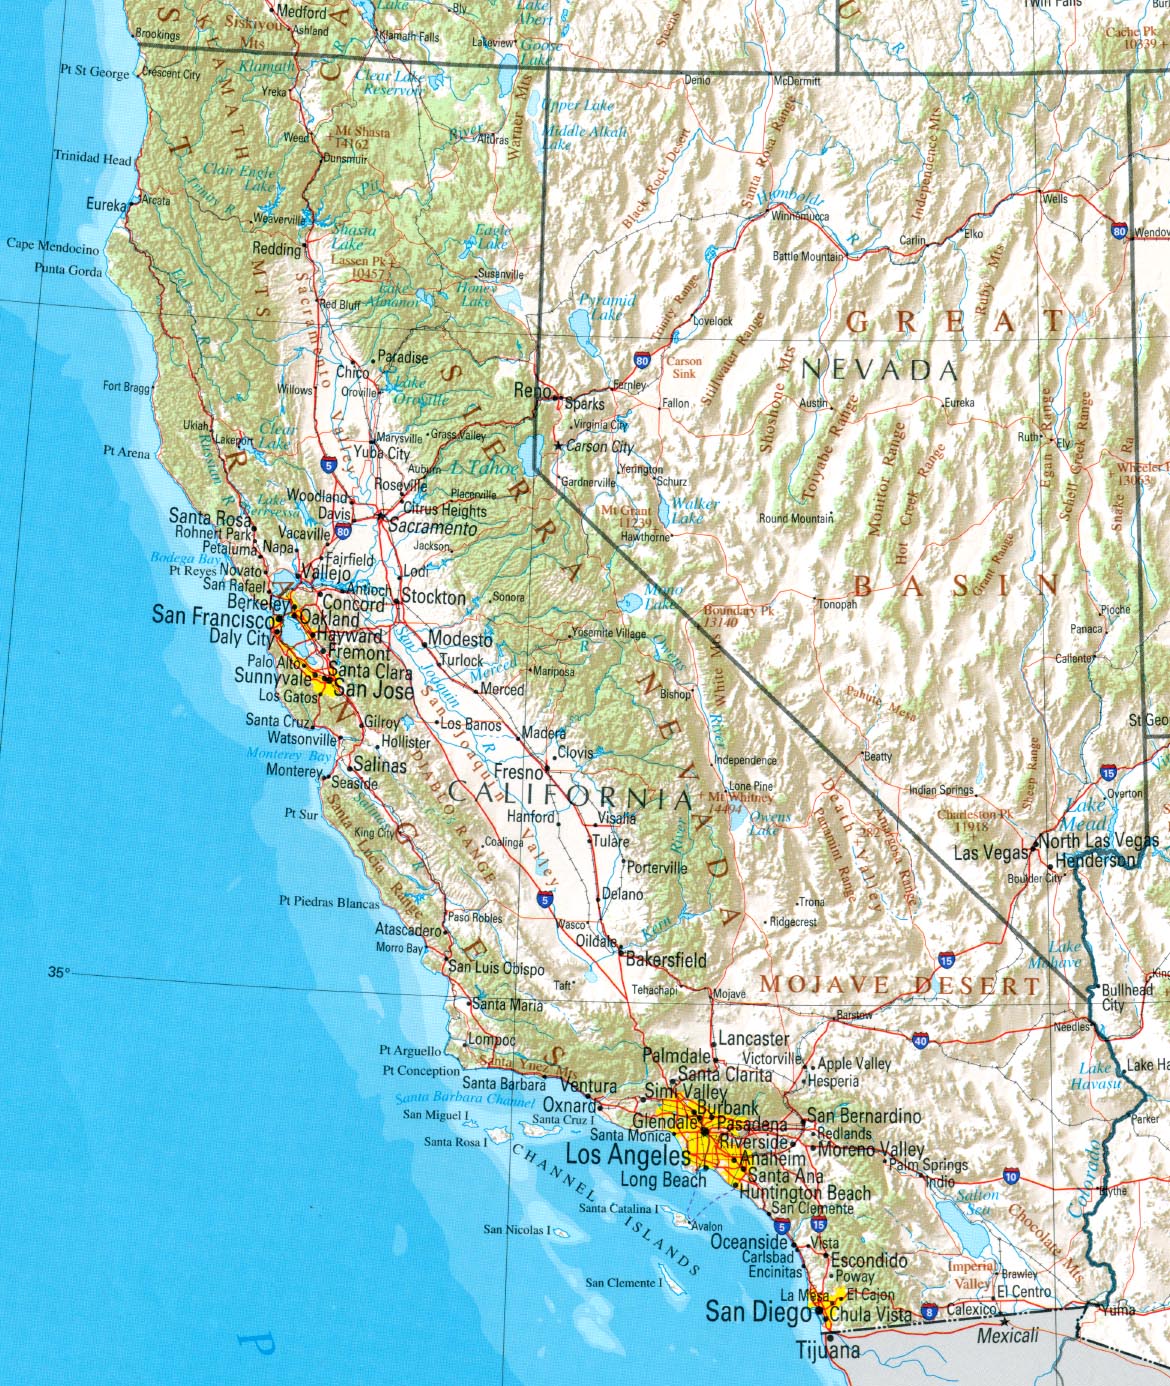 California Reference Map